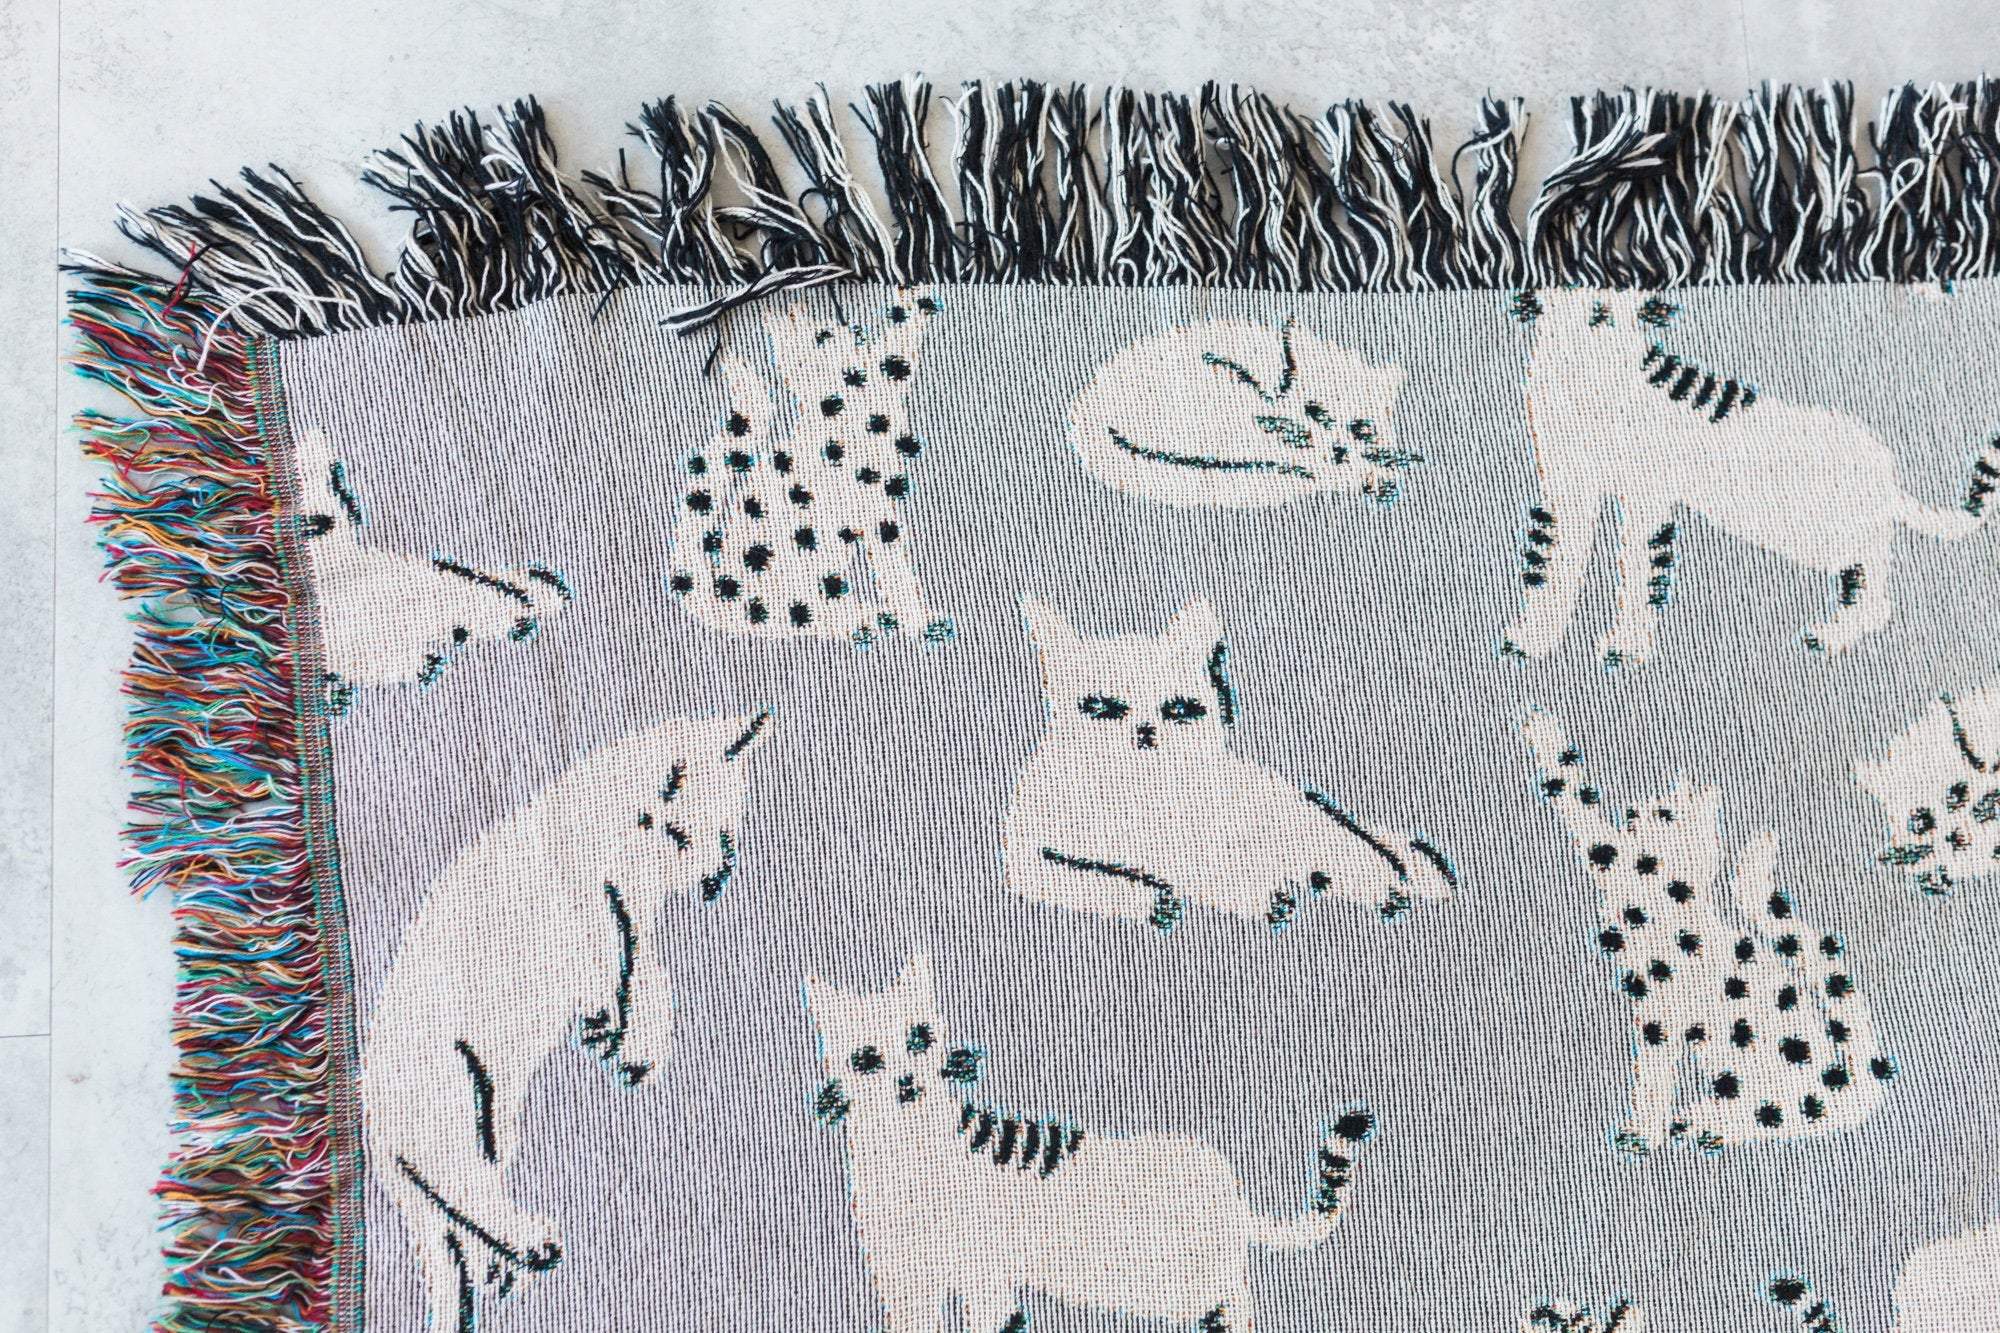 Grey Cats Throw Blanket: Woven Cotton Throw for Sofa, Cute & Funny Gift for Cat or Pet Lovers, Novelty Quirky Decor